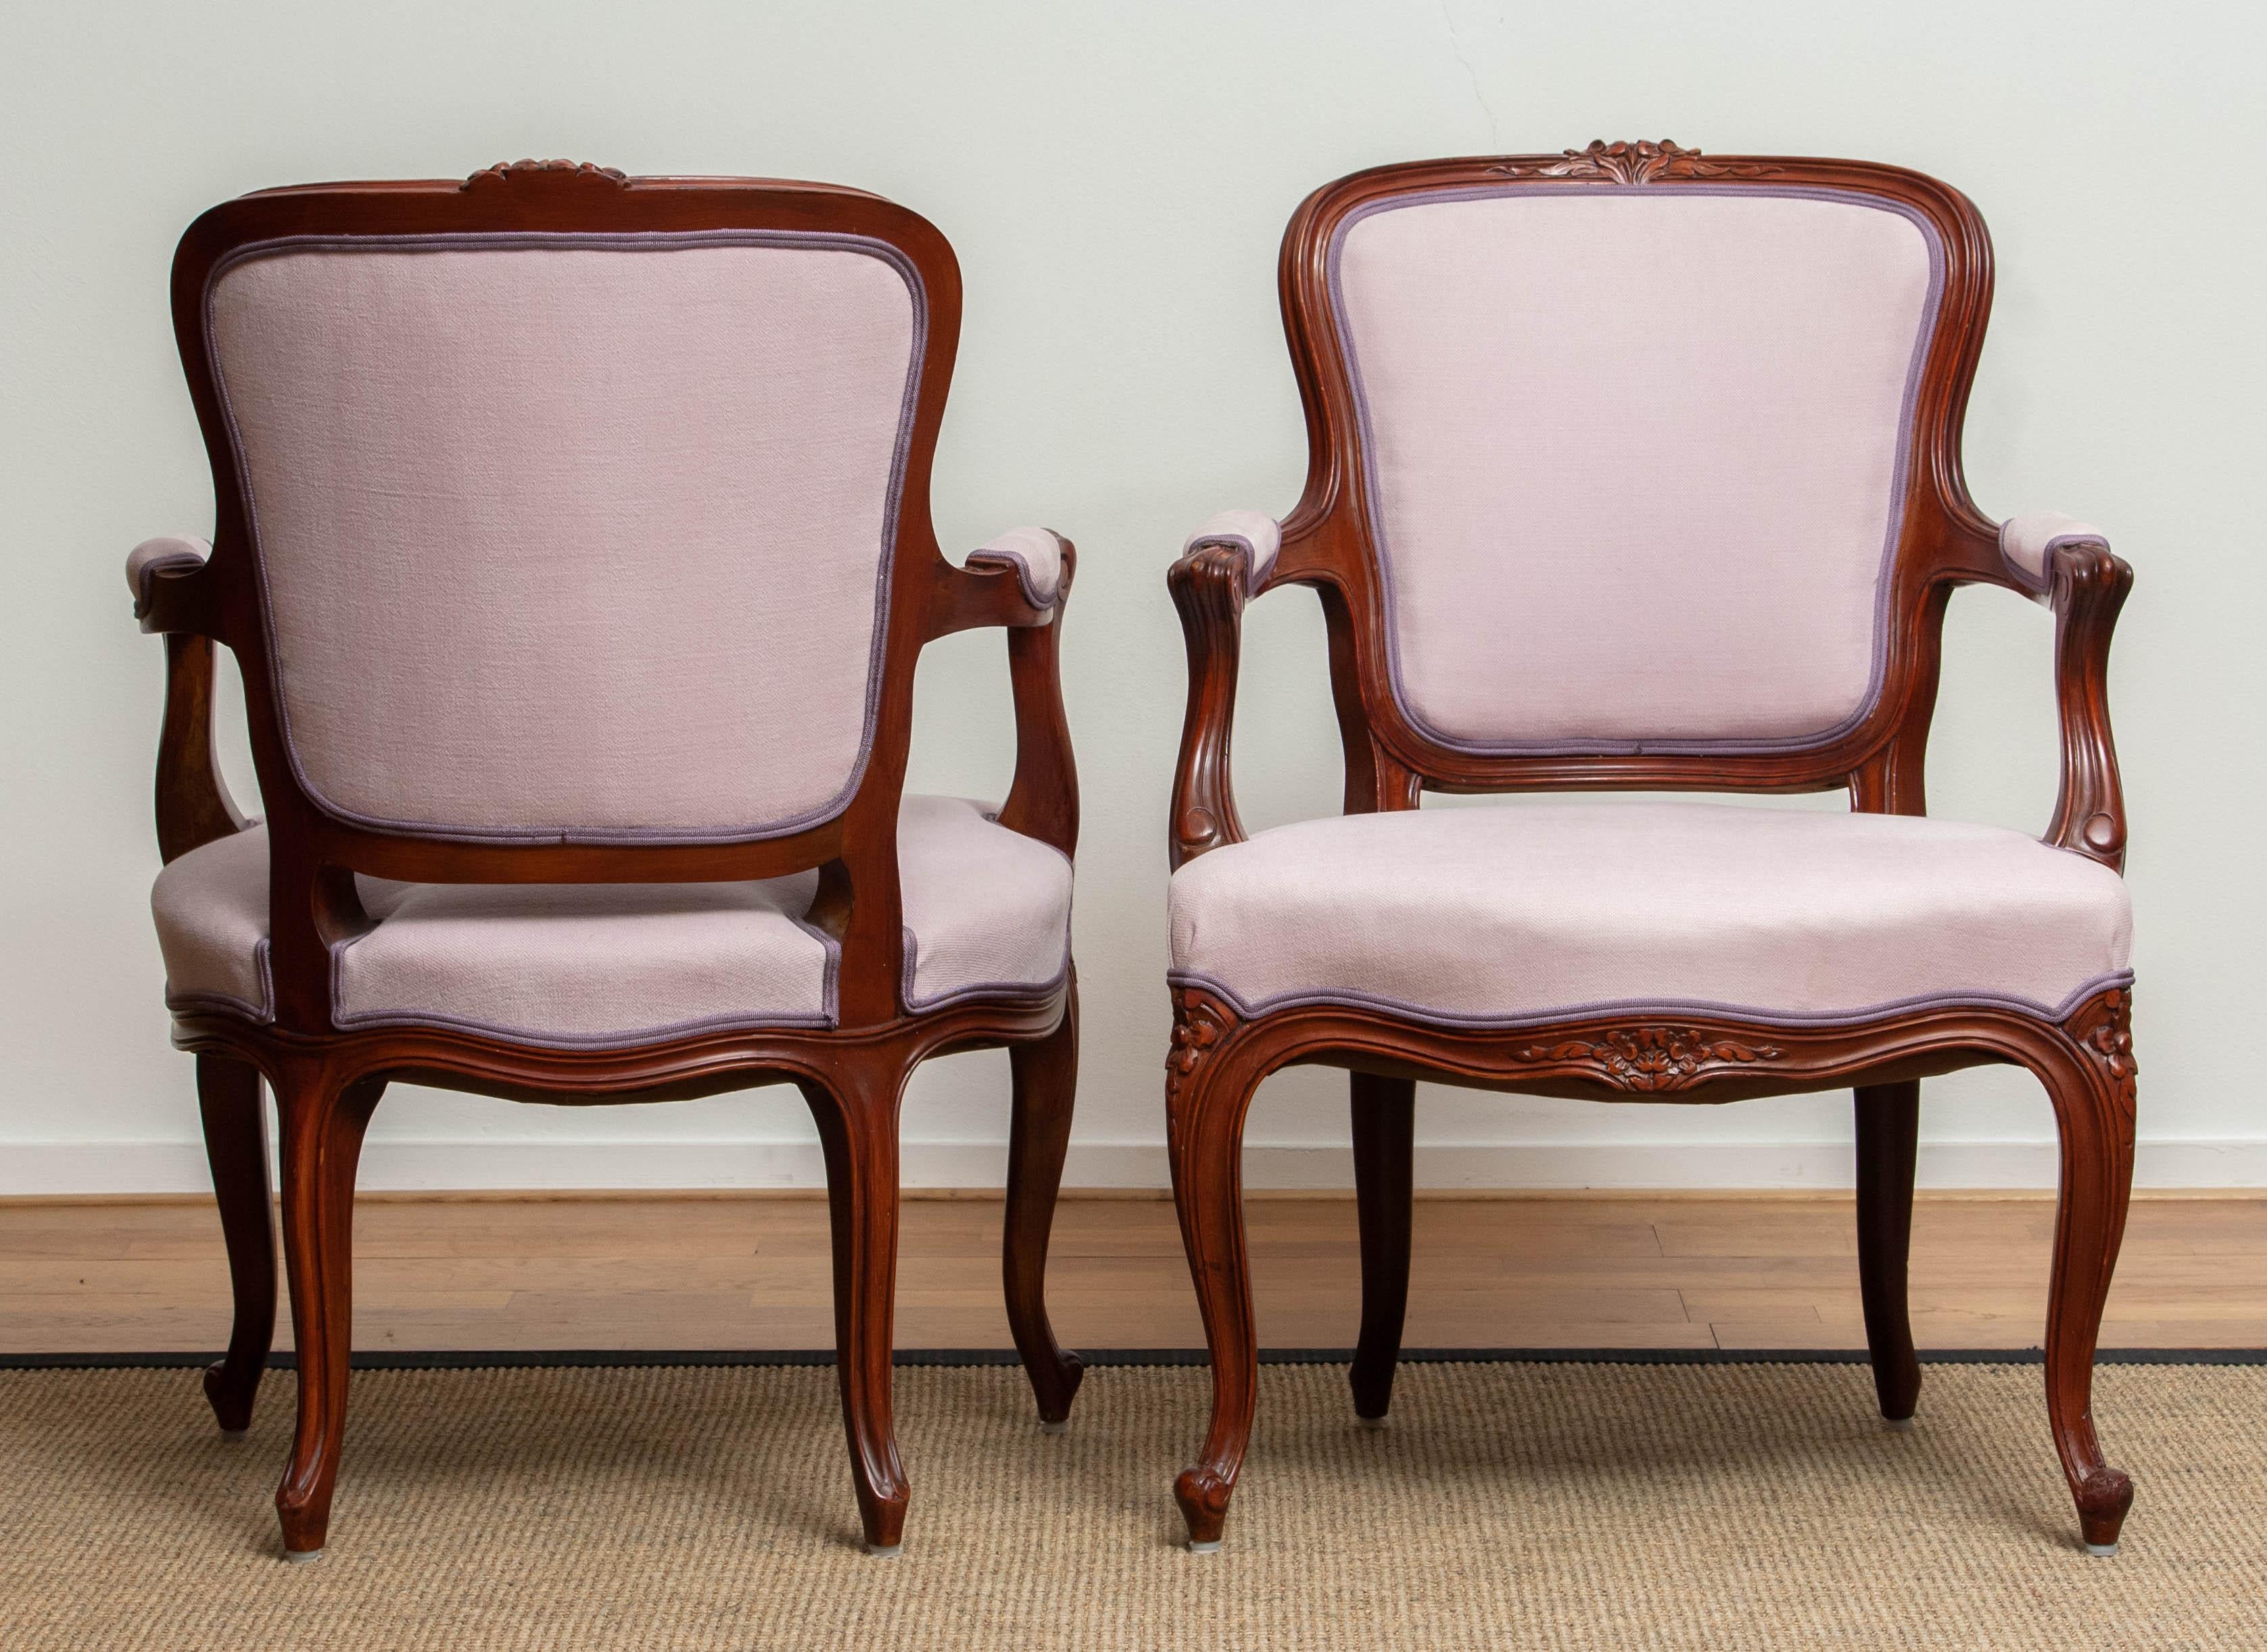 1950s Pair of Pink Swedish Rococo Bergères in the Shabby Chic Technique Chairs F 4